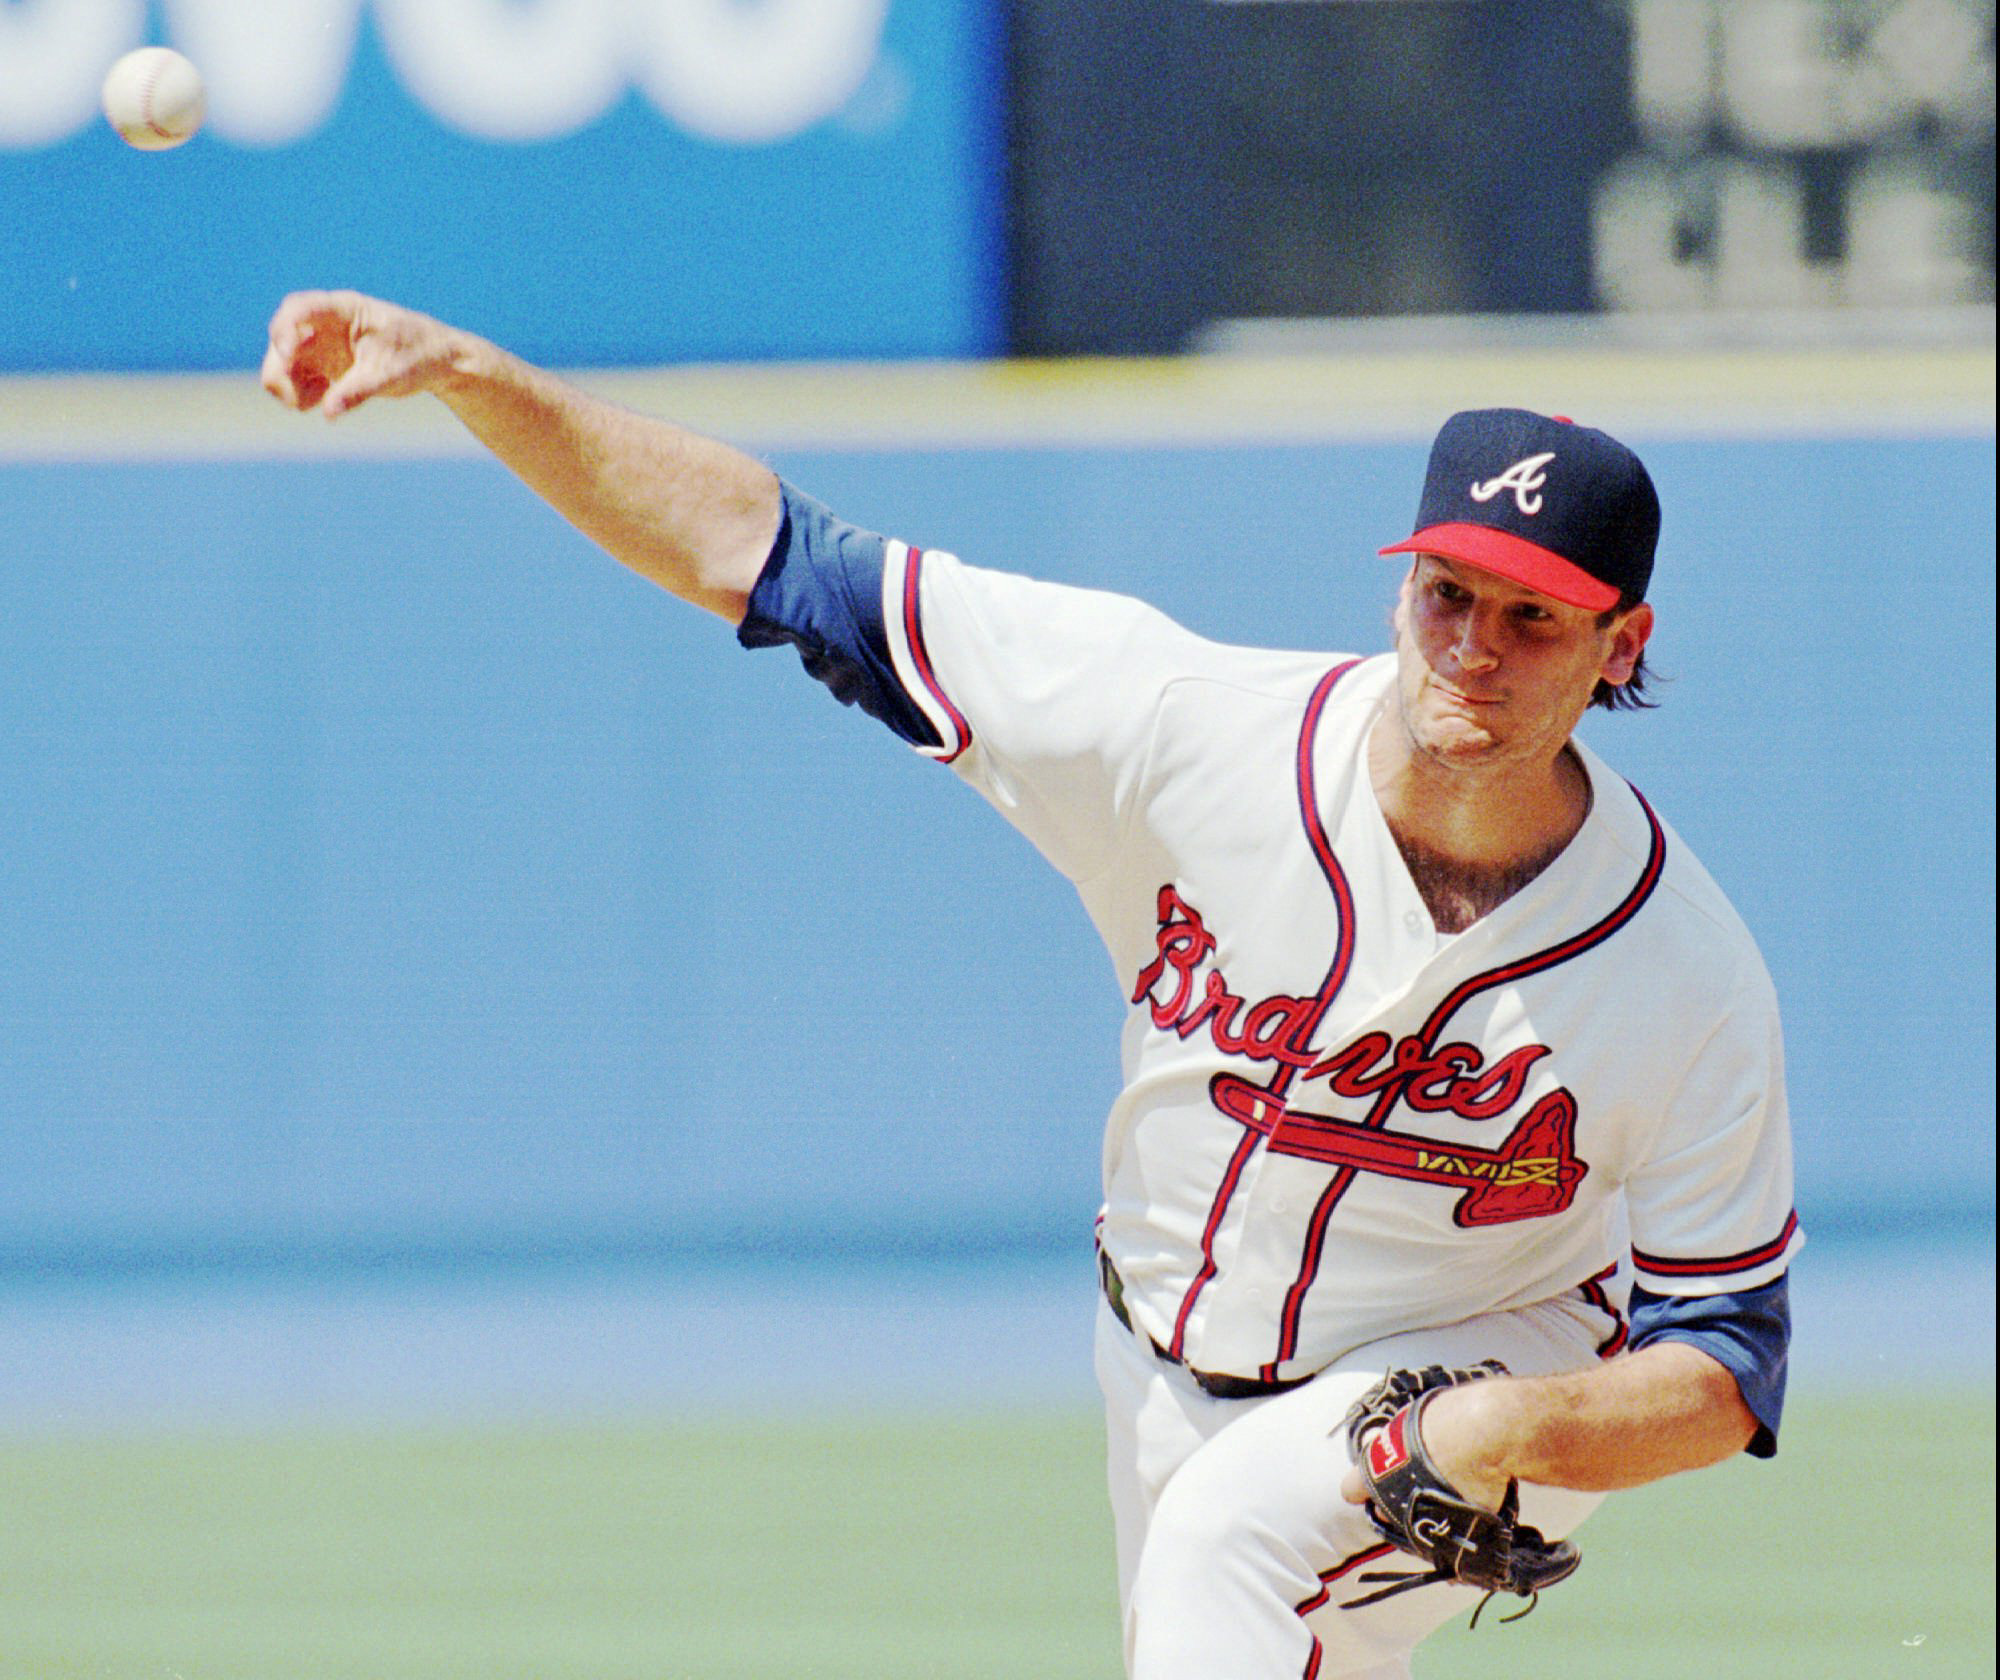 John Smoltz tells great story about his failed no-hitter and a